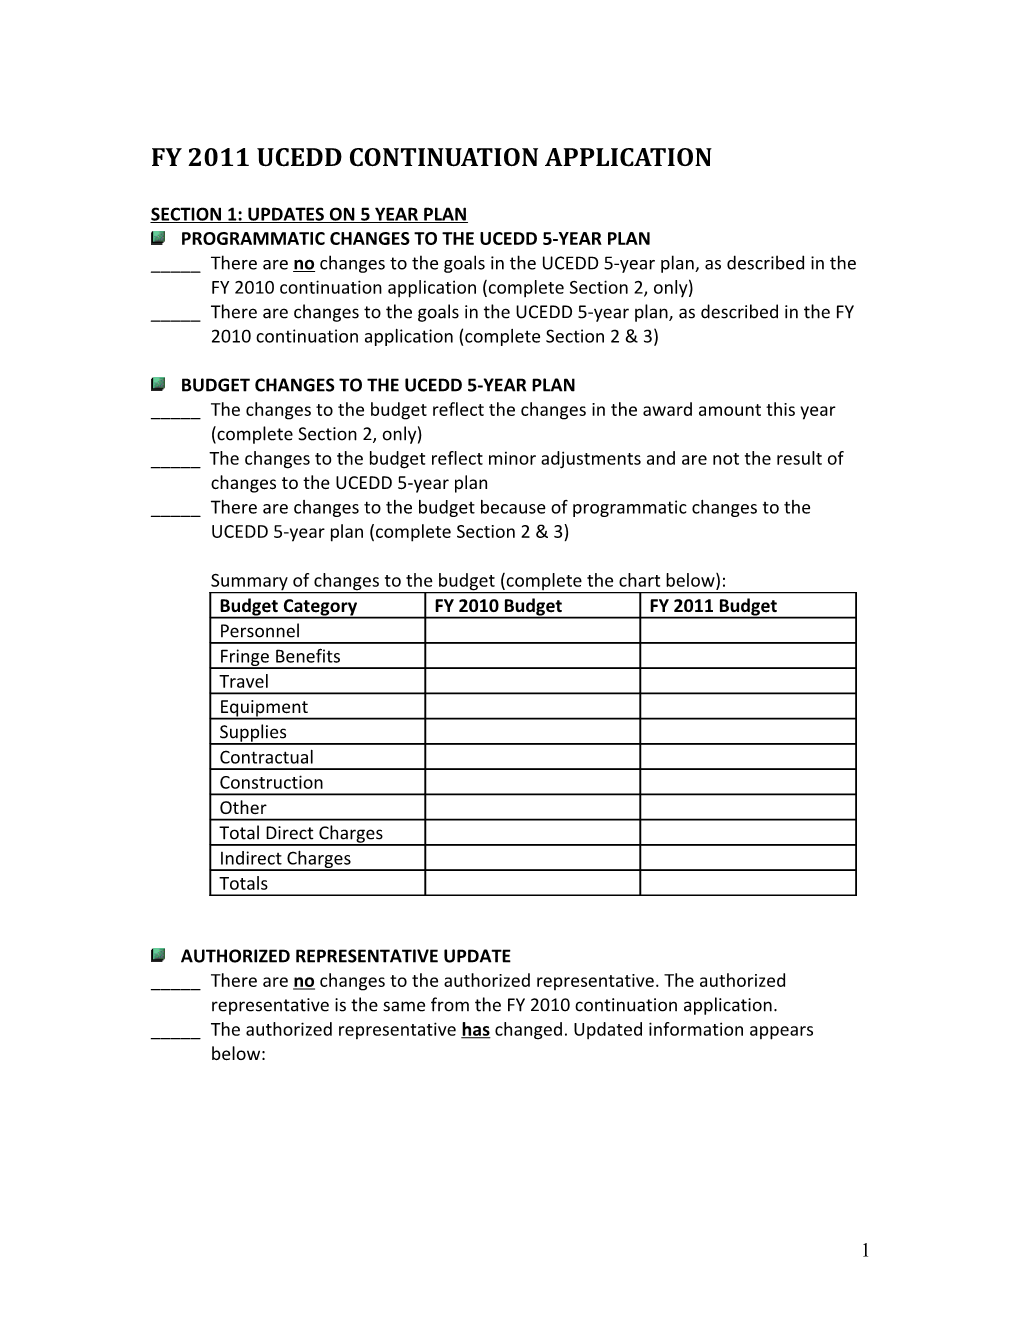 Checklist for the Continuation Application